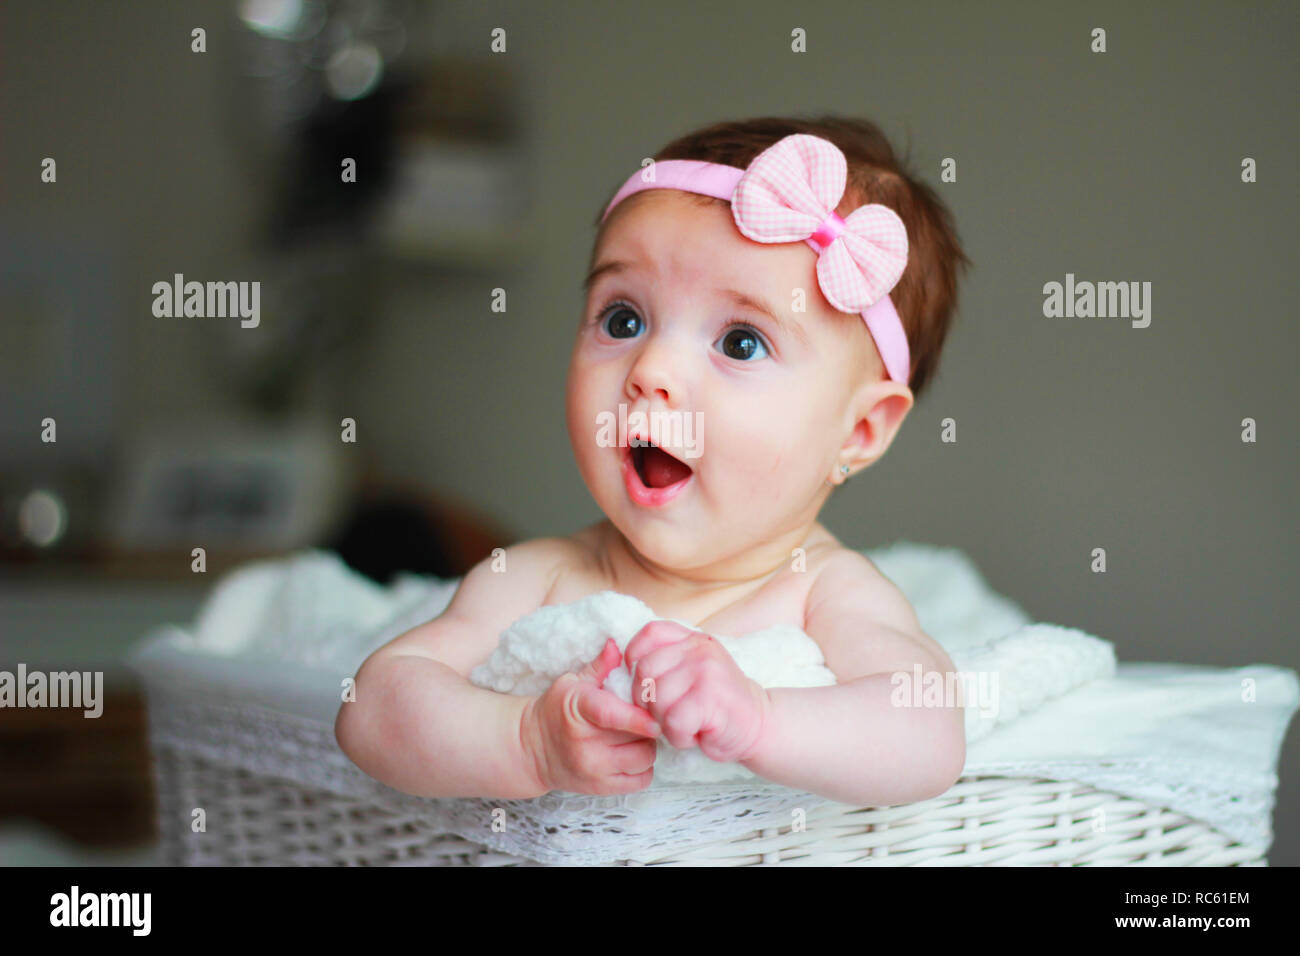 Cute baby girl, with a bow on her hair, with amazement face Stock Photo